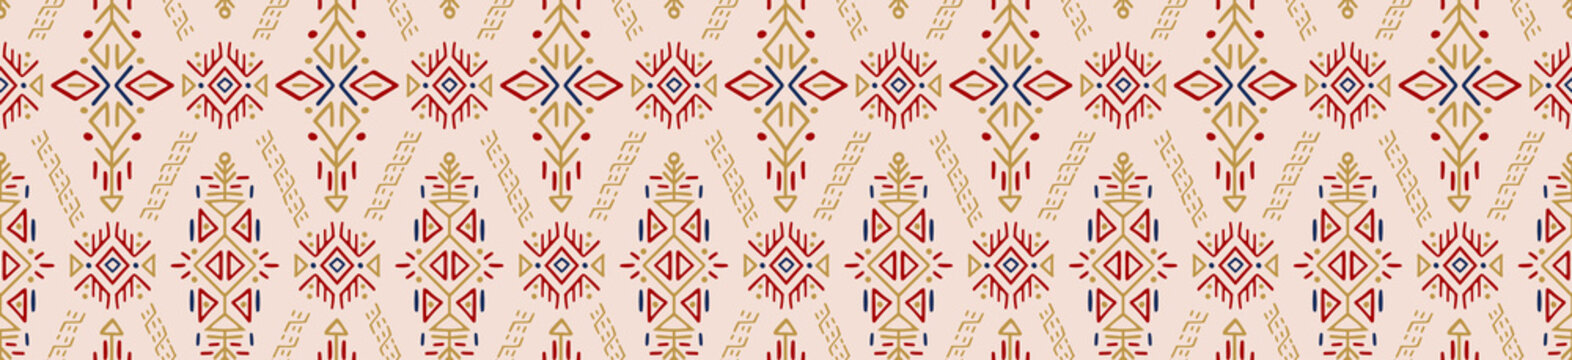 African Ethnic Vector Seamless Pattern